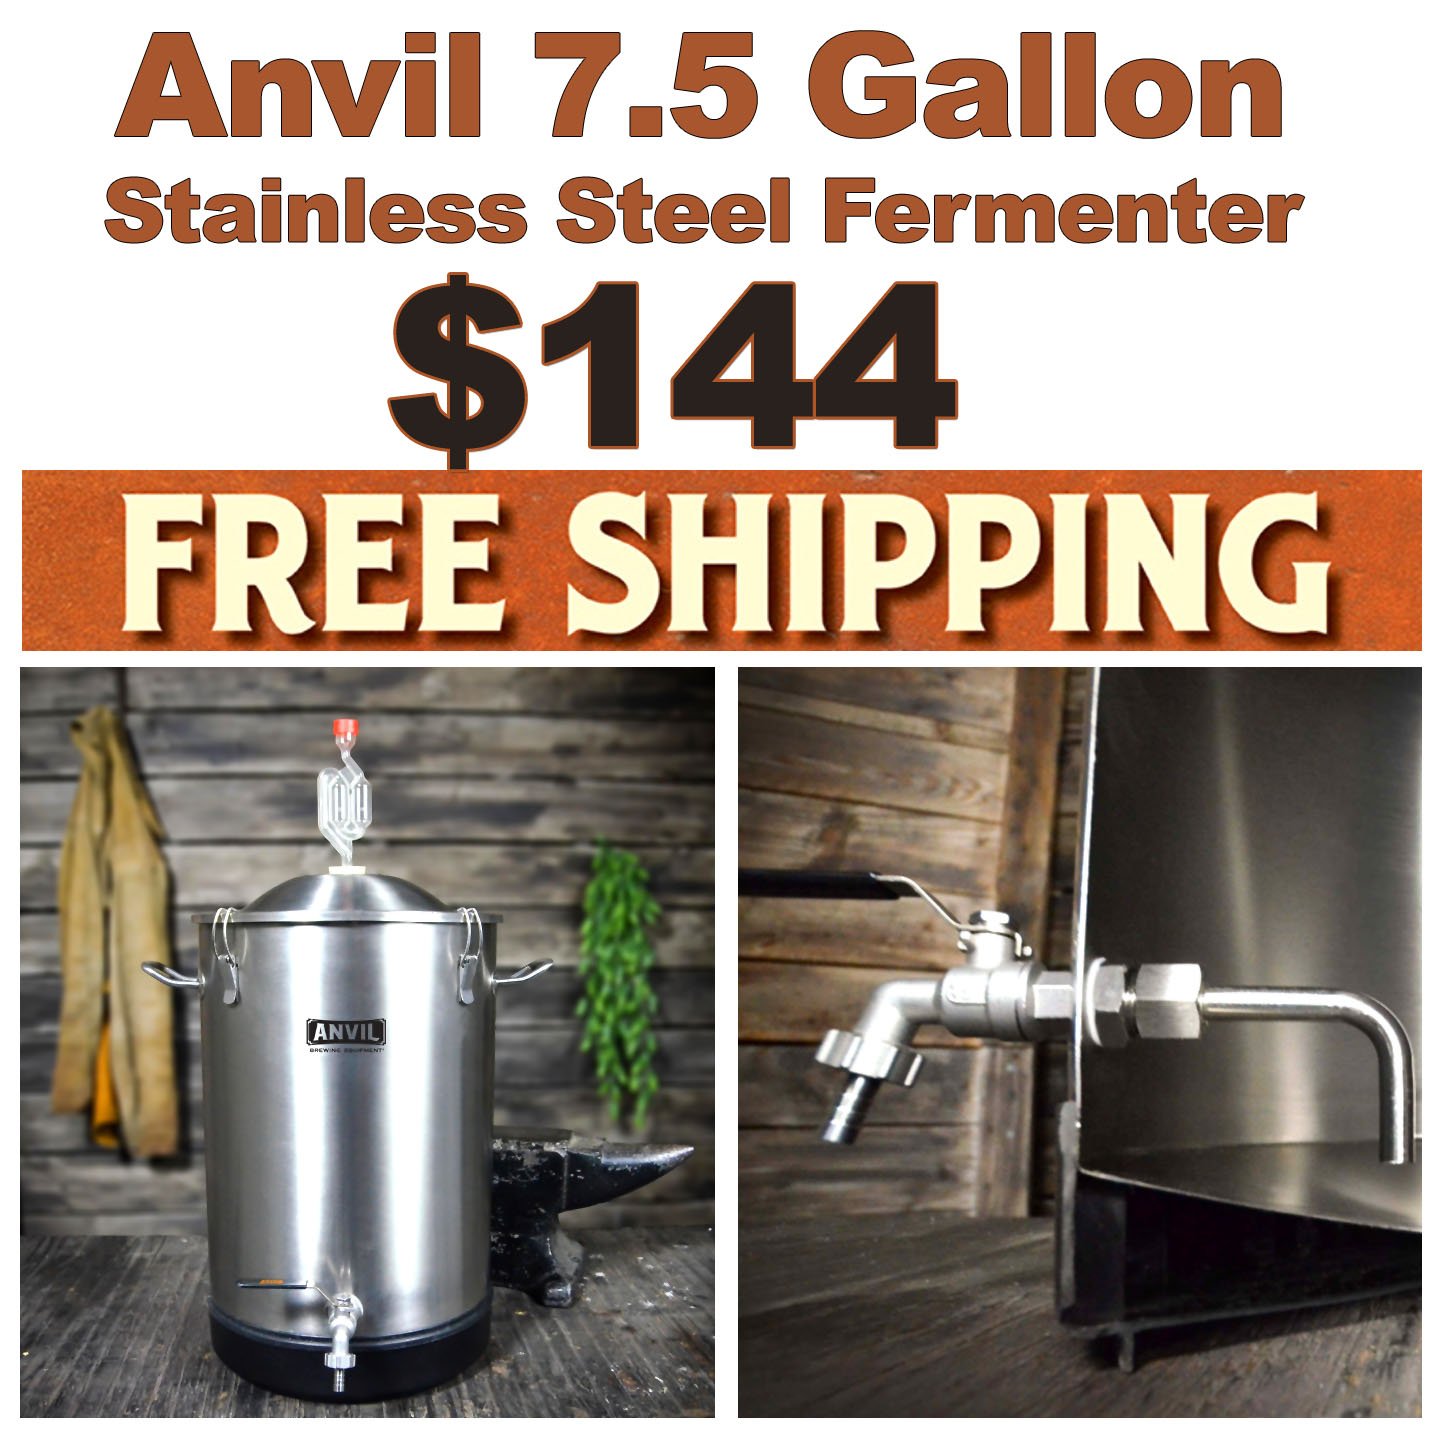 Anvil Home Brewing Promo Code - 7.5 Gallon Fermenter for $144 Plus Free Shipping